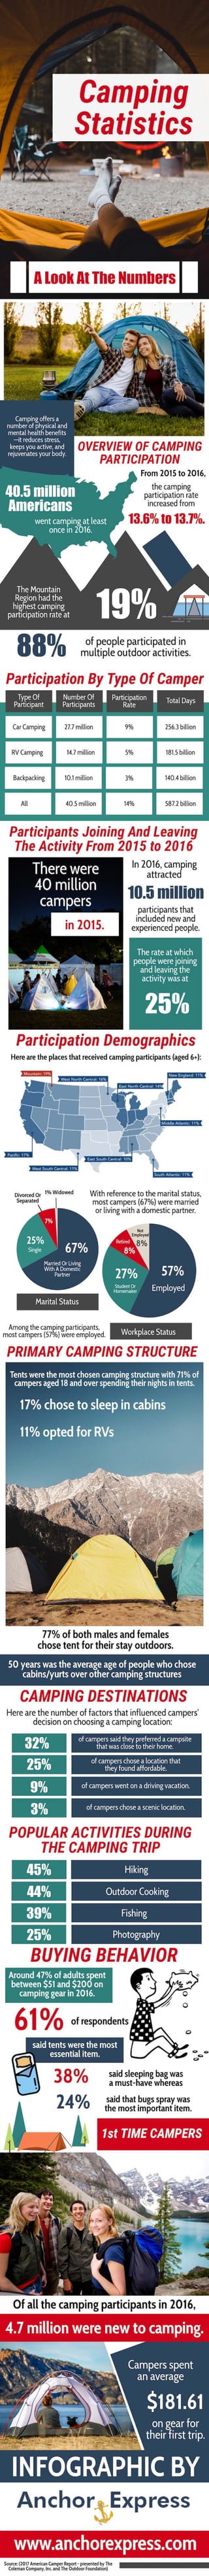 CAMPING PARTICIPATION STATS [INFOGRAPHIC]